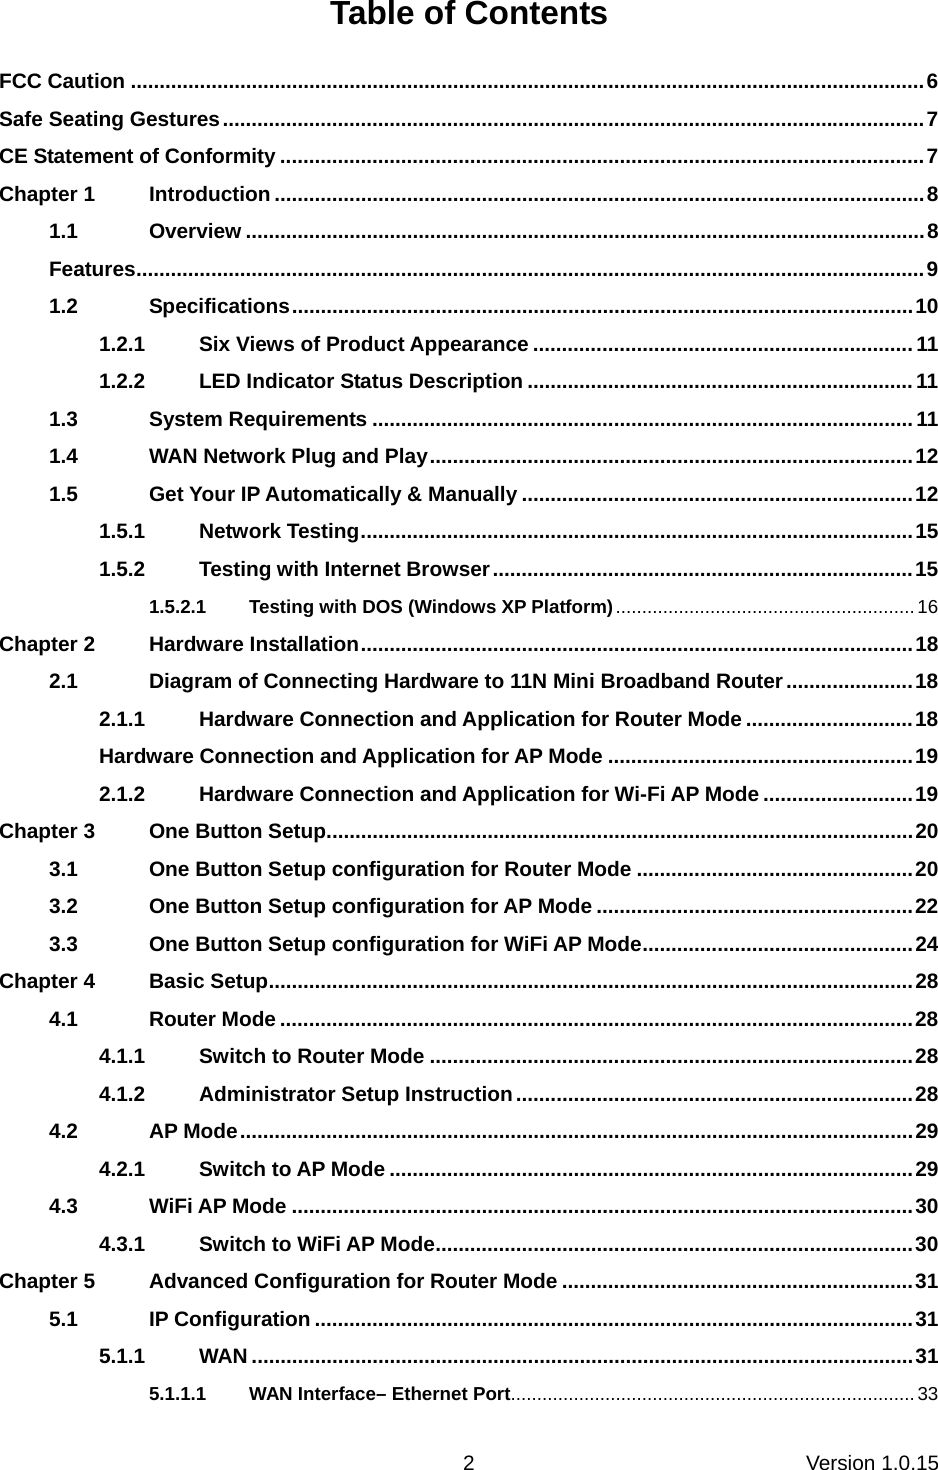 Version 1.0.15 2Table of Contents FCC Caution ..........................................................................................................................................6 Safe Seating Gestures..........................................................................................................................7 CE Statement of Conformity ................................................................................................................7 Chapter 1 Introduction .................................................................................................................8 1.1 Overview ......................................................................................................................8 Features.........................................................................................................................................9 1.2 Specifications............................................................................................................10 1.2.1 Six Views of Product Appearance ..................................................................11 1.2.2 LED Indicator Status Description ...................................................................11 1.3 System Requirements ..............................................................................................11 1.4 WAN Network Plug and Play....................................................................................12 1.5 Get Your IP Automatically &amp; Manually ....................................................................12 1.5.1 Network Testing................................................................................................15 1.5.2 Testing with Internet Browser.........................................................................15 1.5.2.1 Testing with DOS (Windows XP Platform).........................................................16 Chapter 2 Hardware Installation................................................................................................18 2.1 Diagram of Connecting Hardware to 11N Mini Broadband Router......................18 2.1.1 Hardware Connection and Application for Router Mode .............................18 Hardware Connection and Application for AP Mode .....................................................19 2.1.2 Hardware Connection and Application for Wi-Fi AP Mode ..........................19 Chapter 3 One Button Setup......................................................................................................20 3.1 One Button Setup configuration for Router Mode ................................................20 3.2 One Button Setup configuration for AP Mode .......................................................22 3.3 One Button Setup configuration for WiFi AP Mode...............................................24 Chapter 4 Basic Setup................................................................................................................28 4.1 Router Mode ..............................................................................................................28 4.1.1 Switch to Router Mode ....................................................................................28 4.1.2 Administrator Setup Instruction.....................................................................28 4.2 AP Mode.....................................................................................................................29 4.2.1 Switch to AP Mode ...........................................................................................29 4.3 WiFi AP Mode ............................................................................................................30 4.3.1 Switch to WiFi AP Mode...................................................................................30 Chapter 5 Advanced Configuration for Router Mode .............................................................31 5.1 IP Configuration ........................................................................................................31 5.1.1 WAN ...................................................................................................................31 5.1.1.1 WAN Interface– Ethernet Port.............................................................................33 